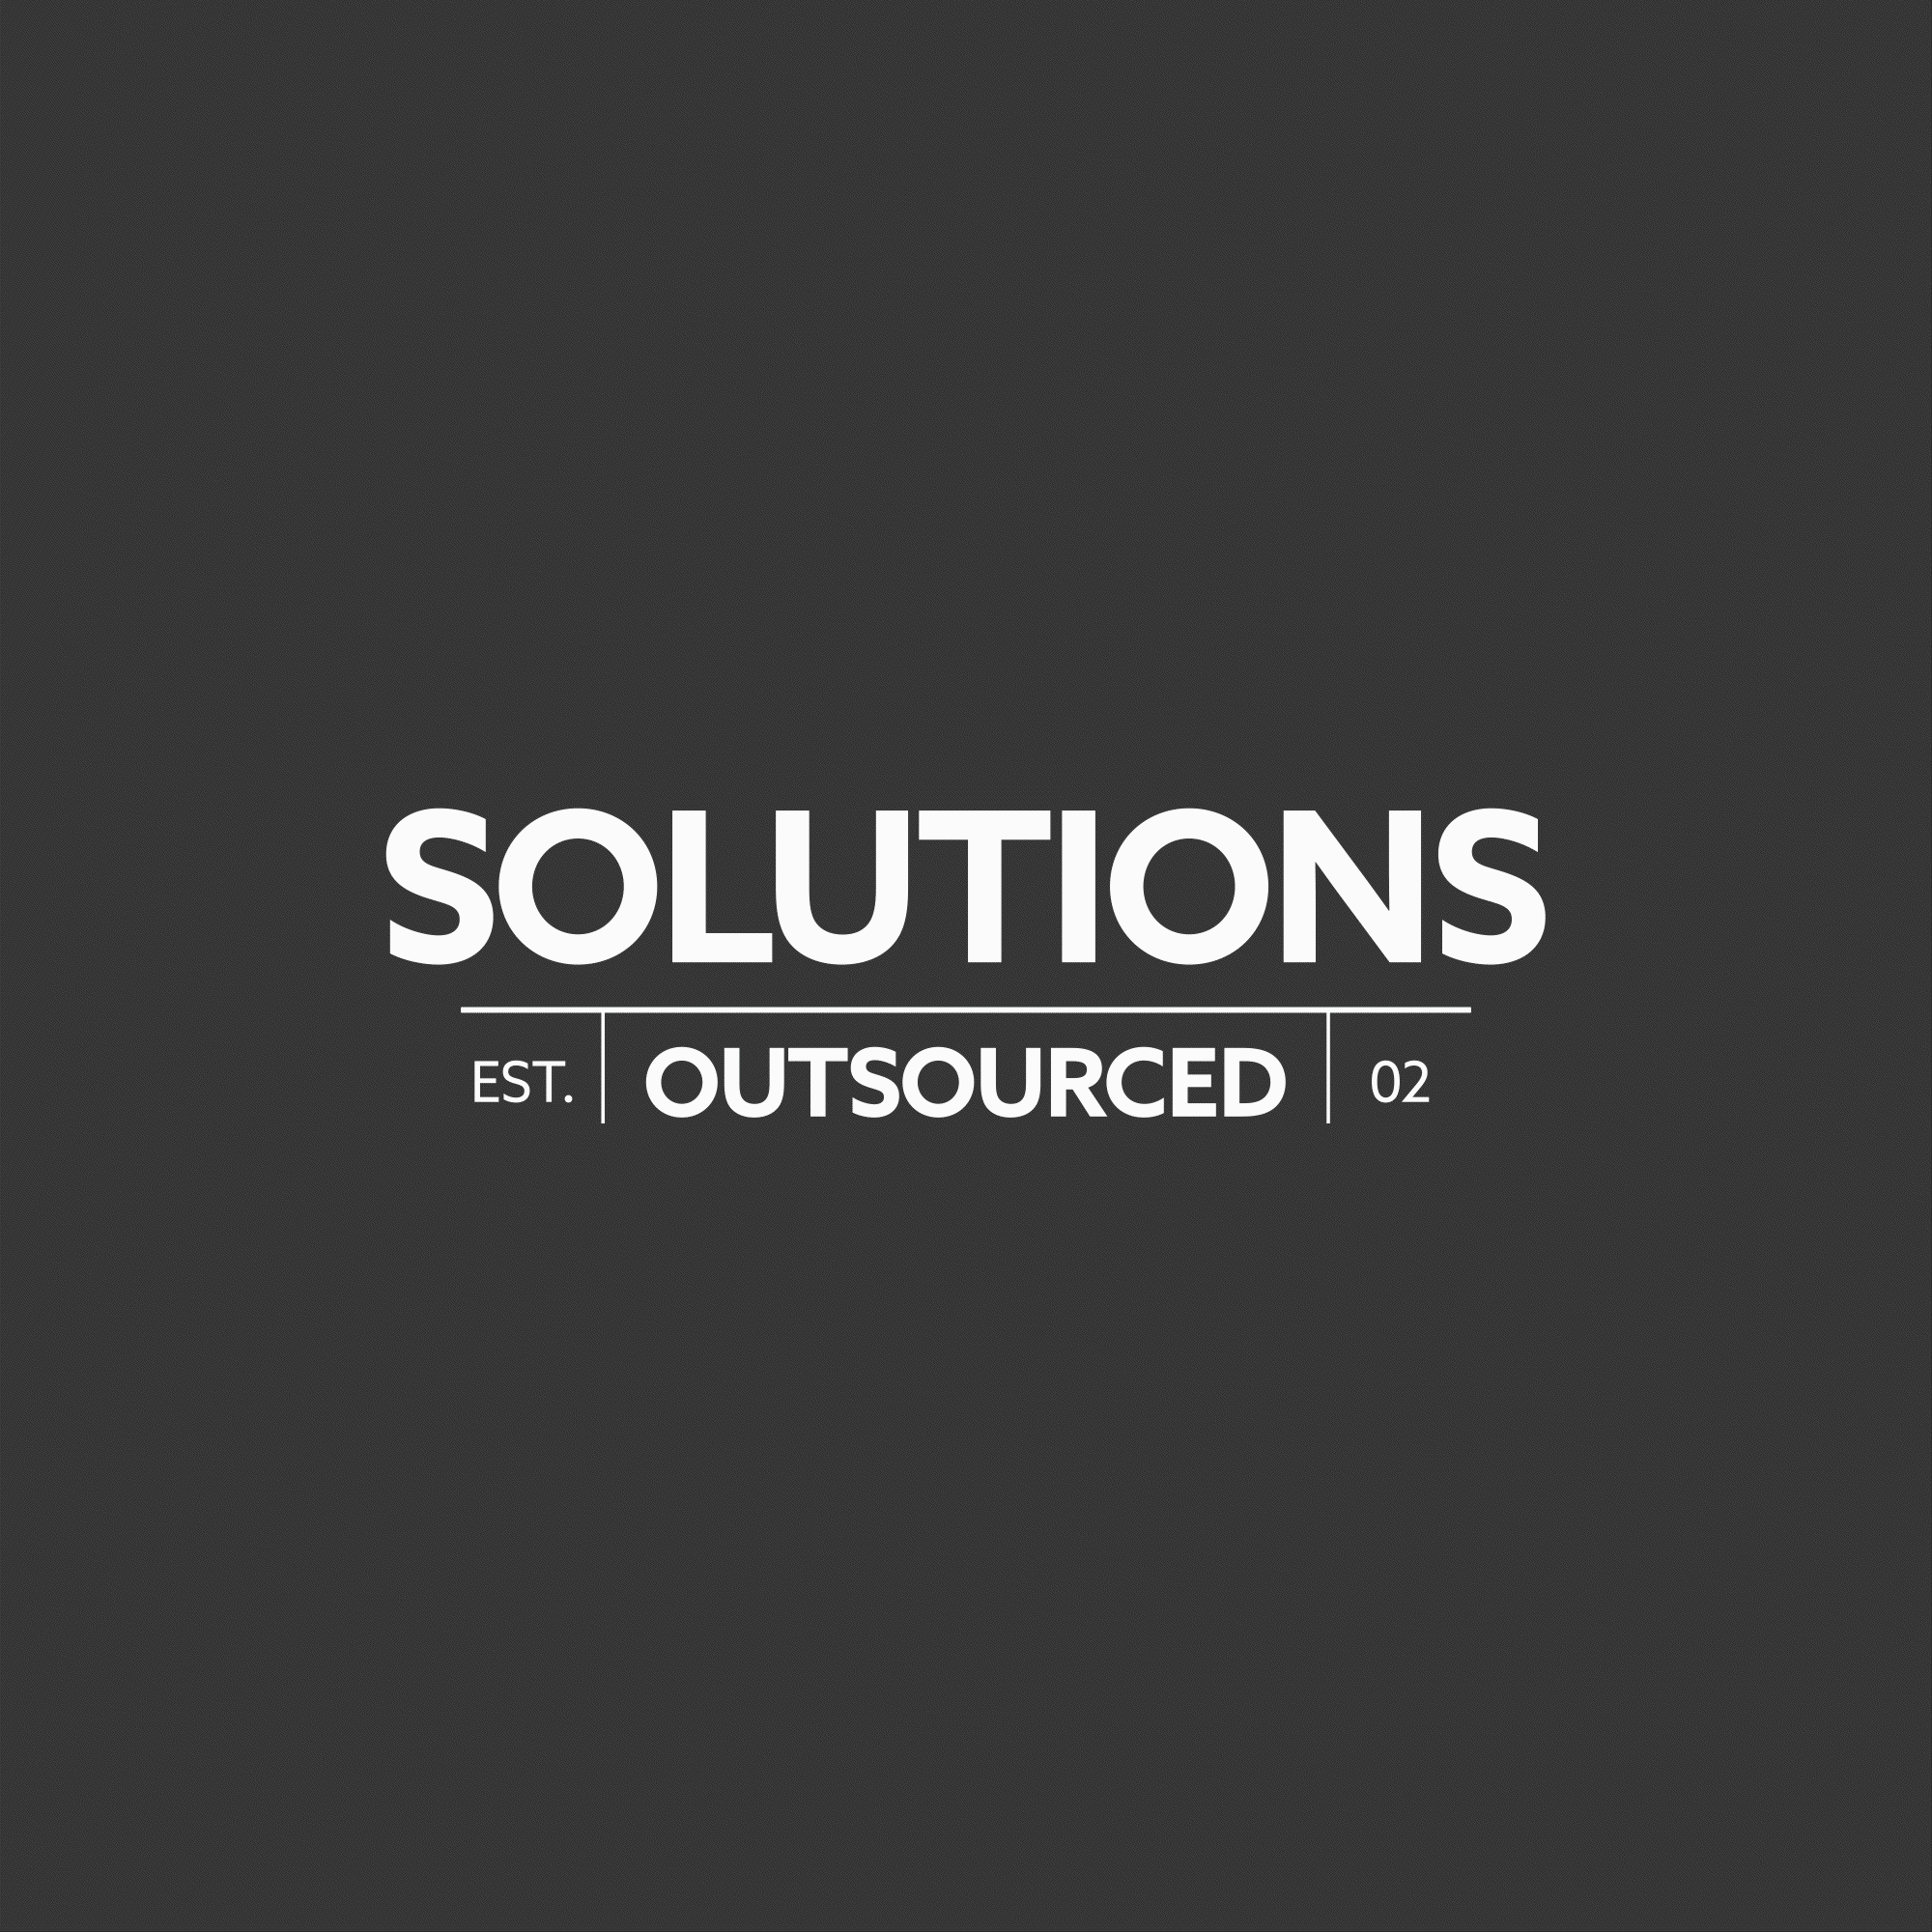 Solutions Outsourced has rebranded to Greenhouse Creative